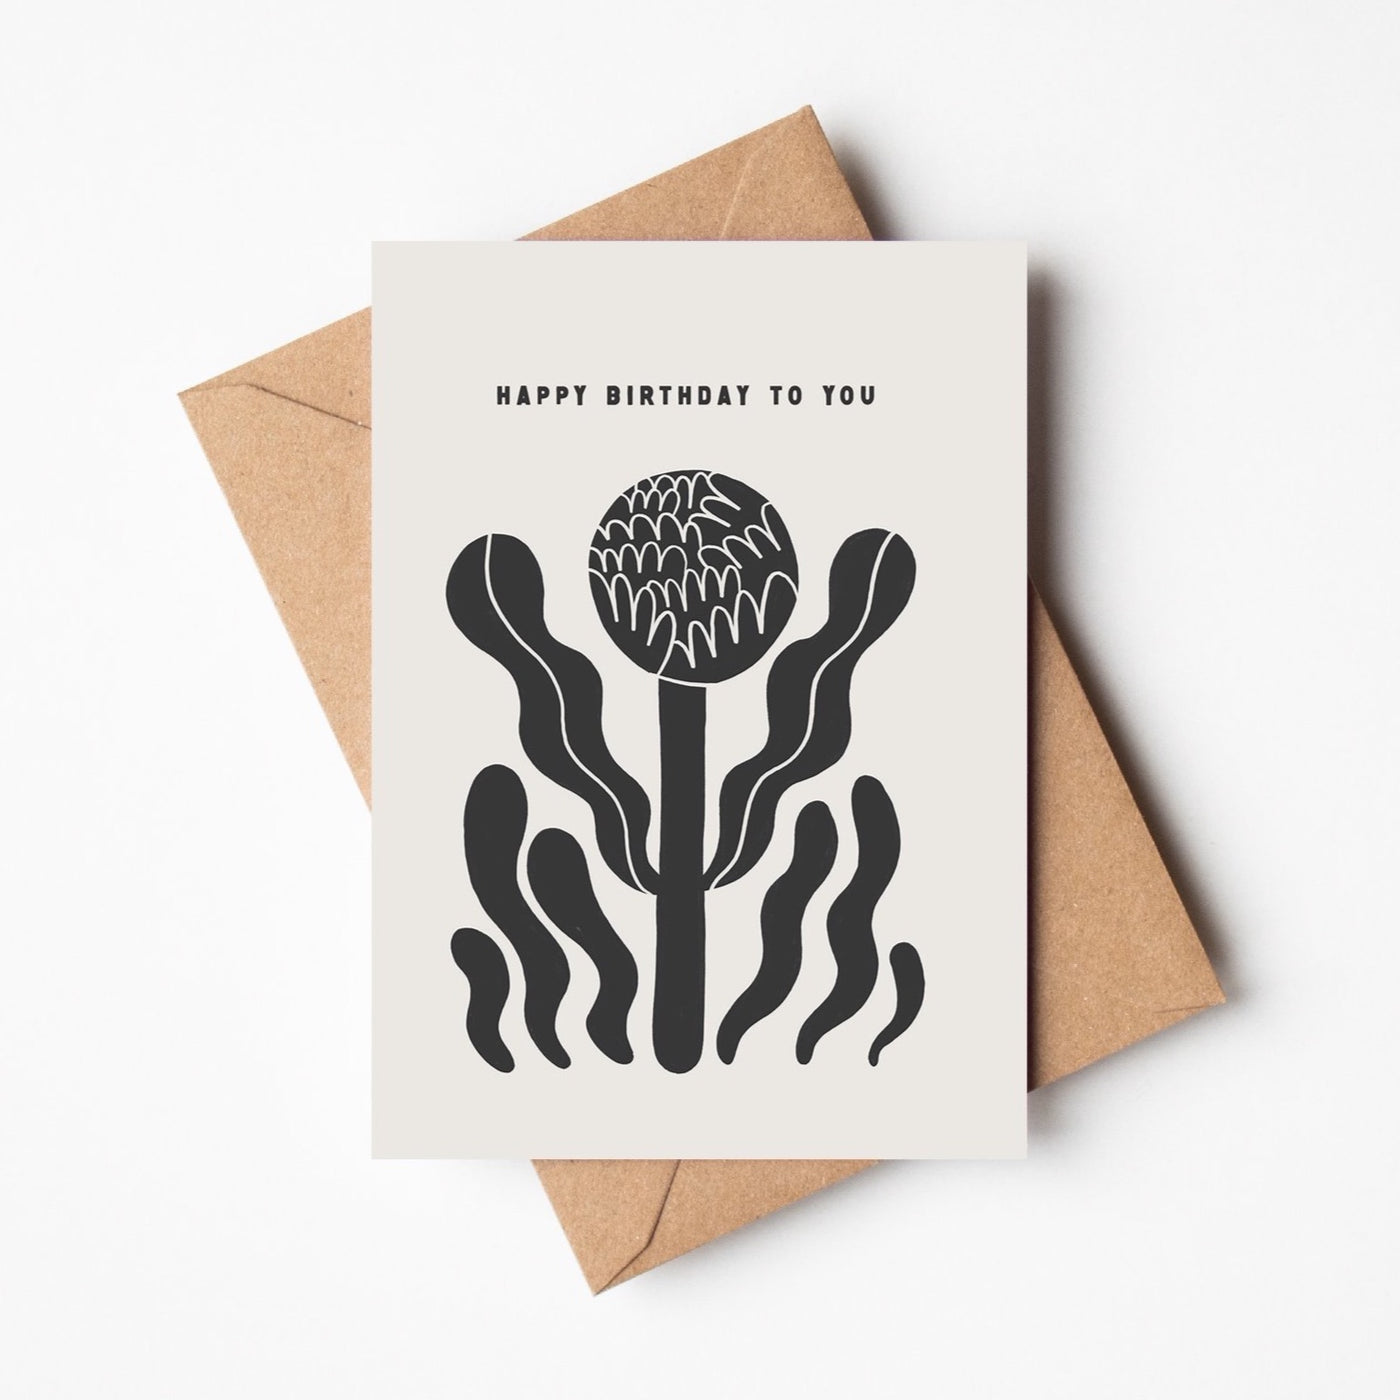 'Happy Birthday To You!' Card